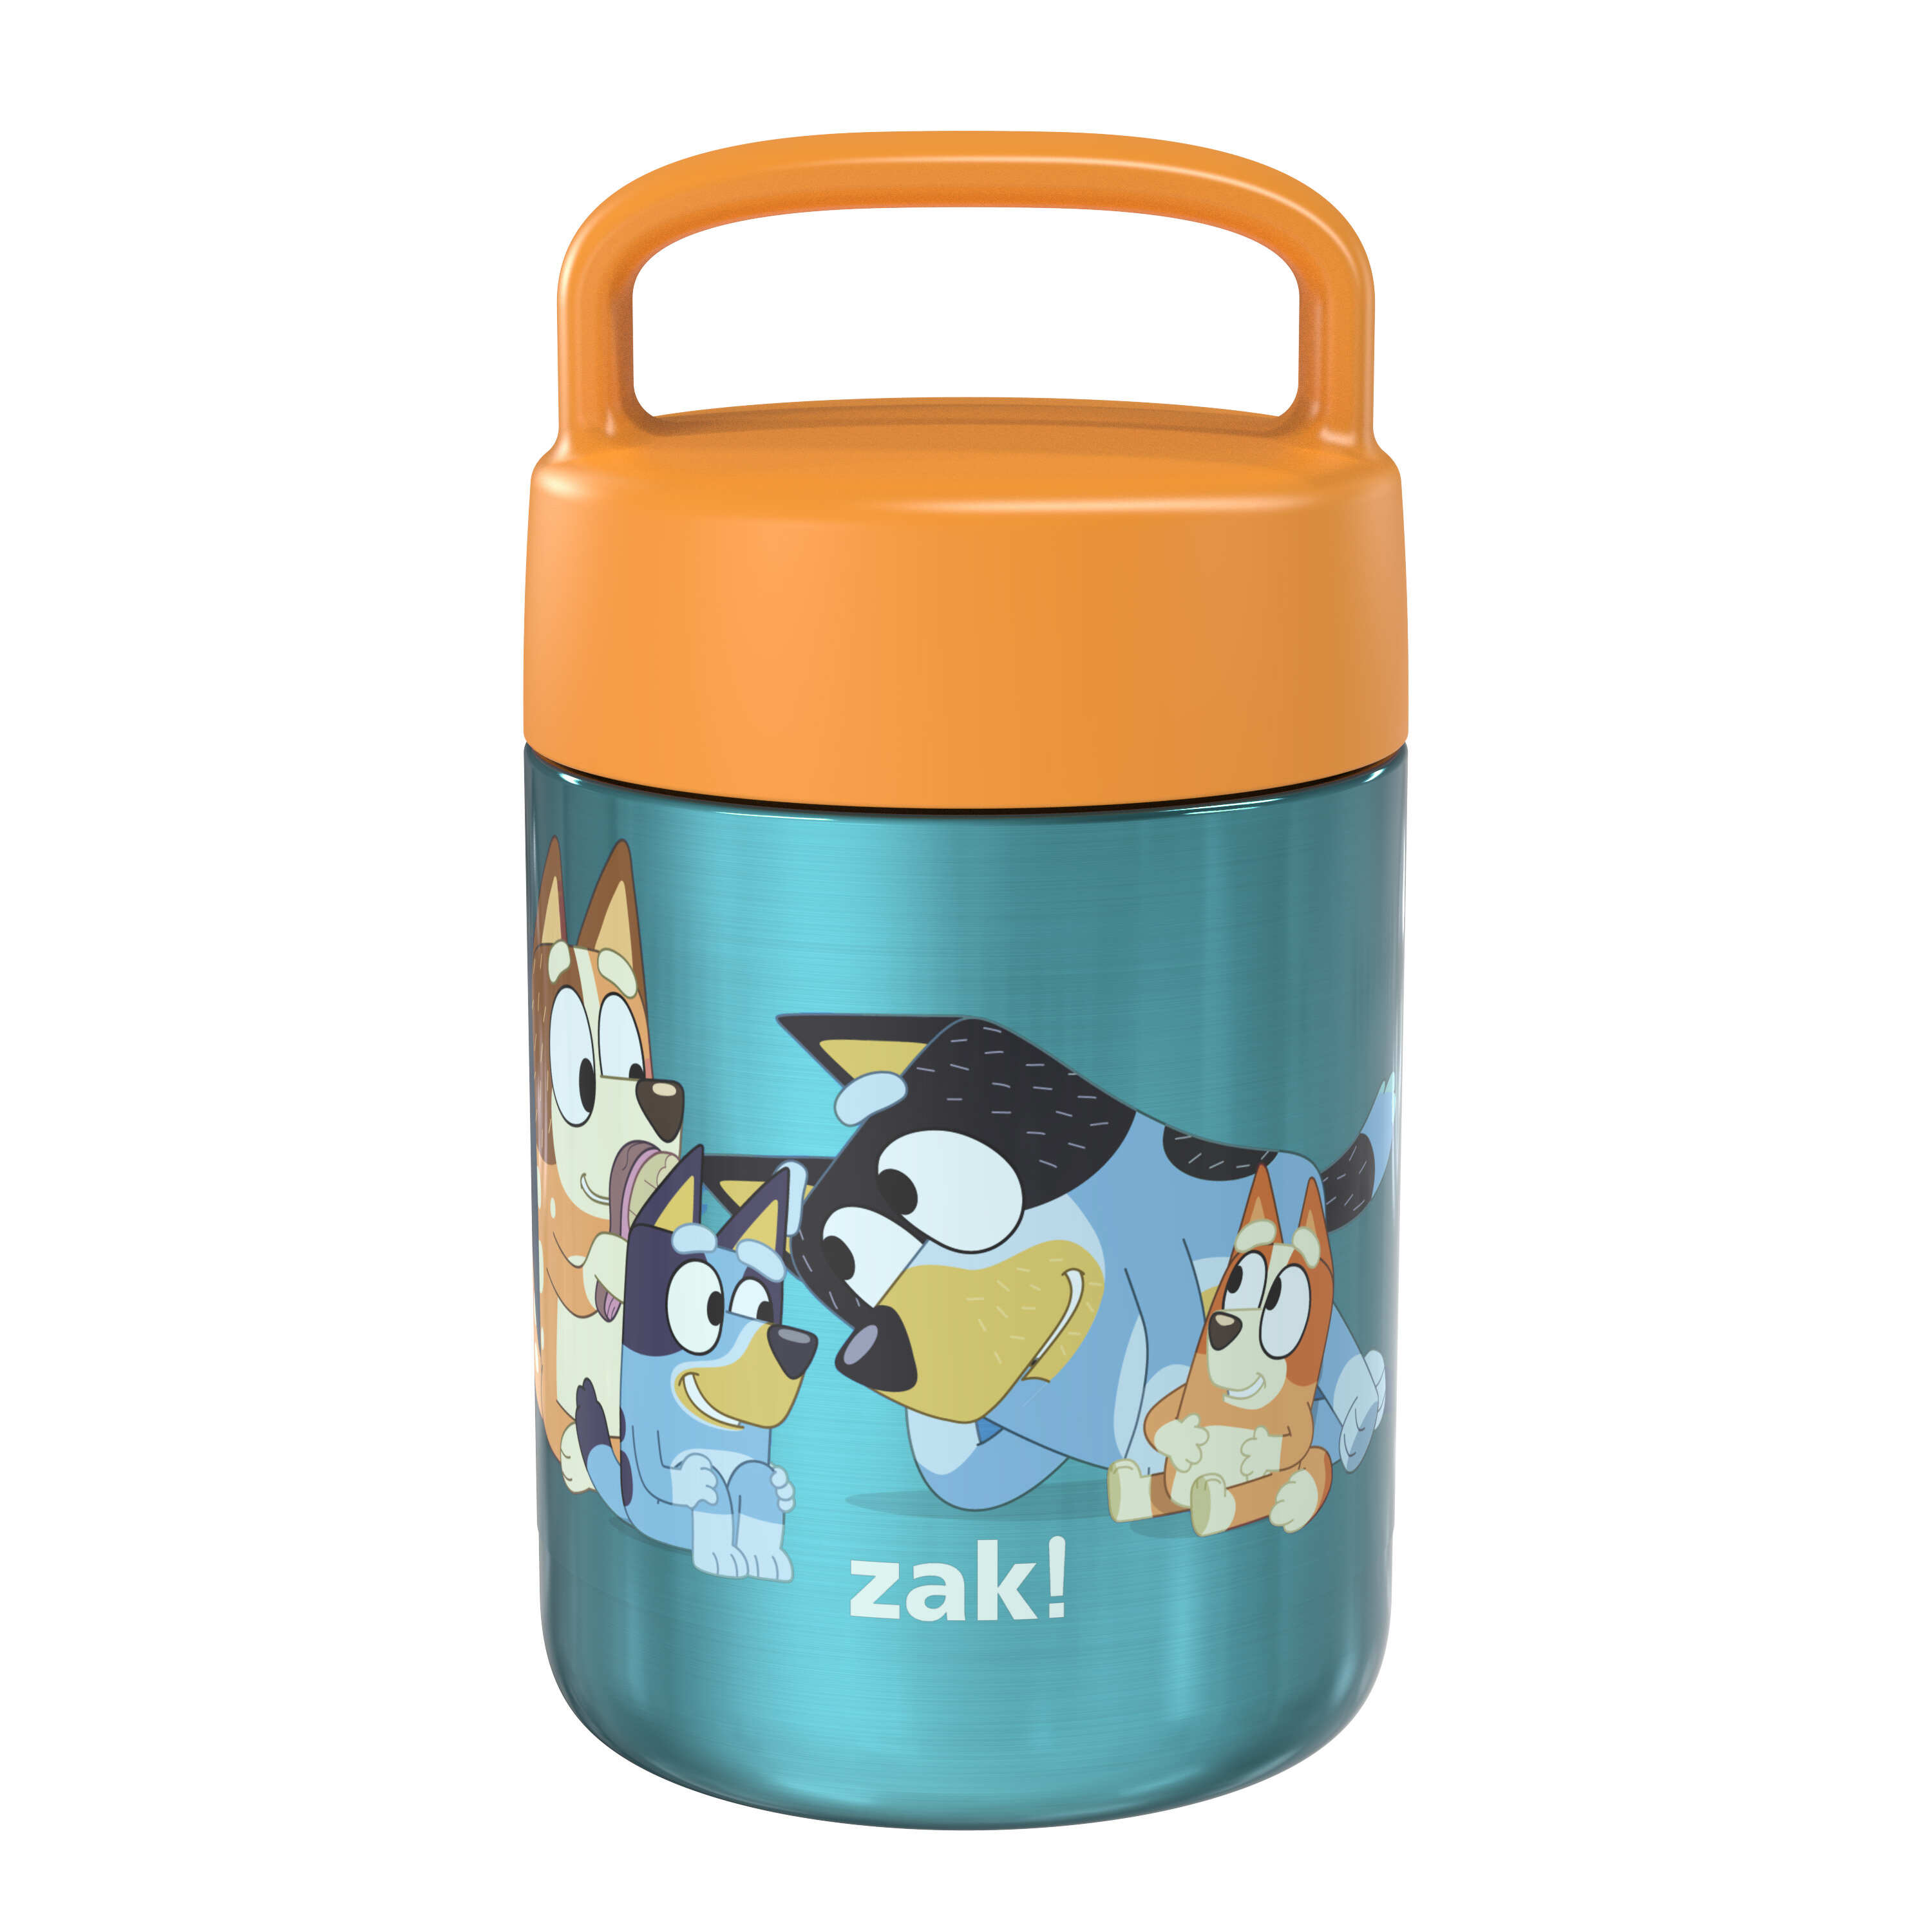 Zak Designs Character Plastic Sandwich Container for Kids 